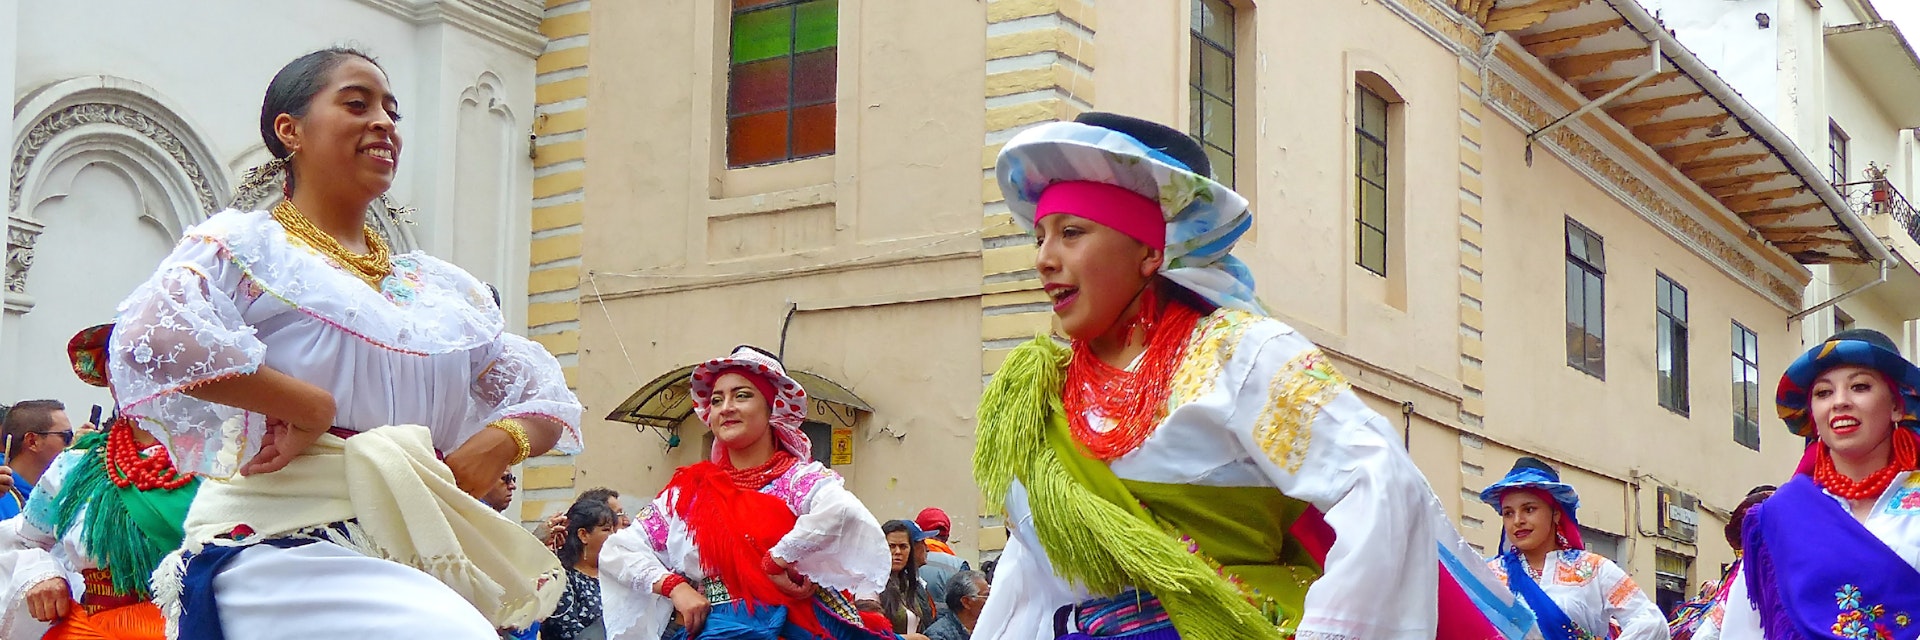 Cuenca, Ecuador - December 24,2018: Christmas parade Pase Del Niño Viajero (Traveling Child) in honor of baby Jesus. Group of folk dancers in costumes Otavalo and Cayambe people at the historical center of city